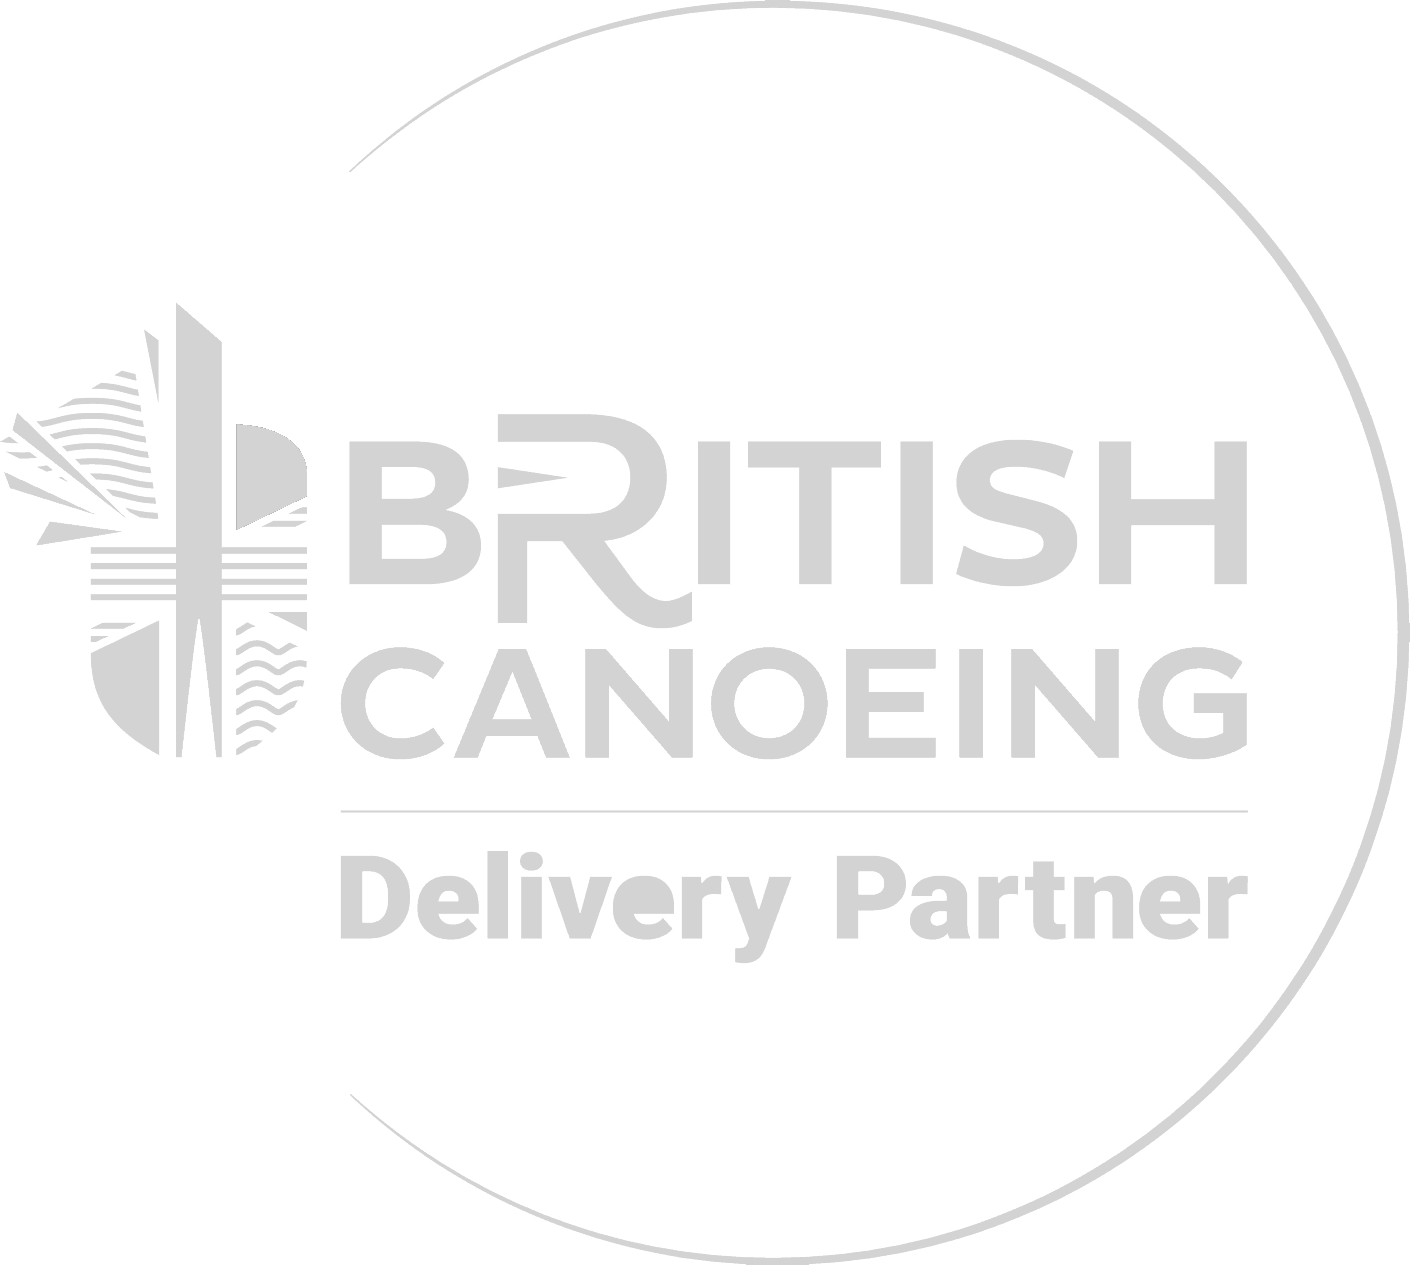 British Canoeing Delivery Partner